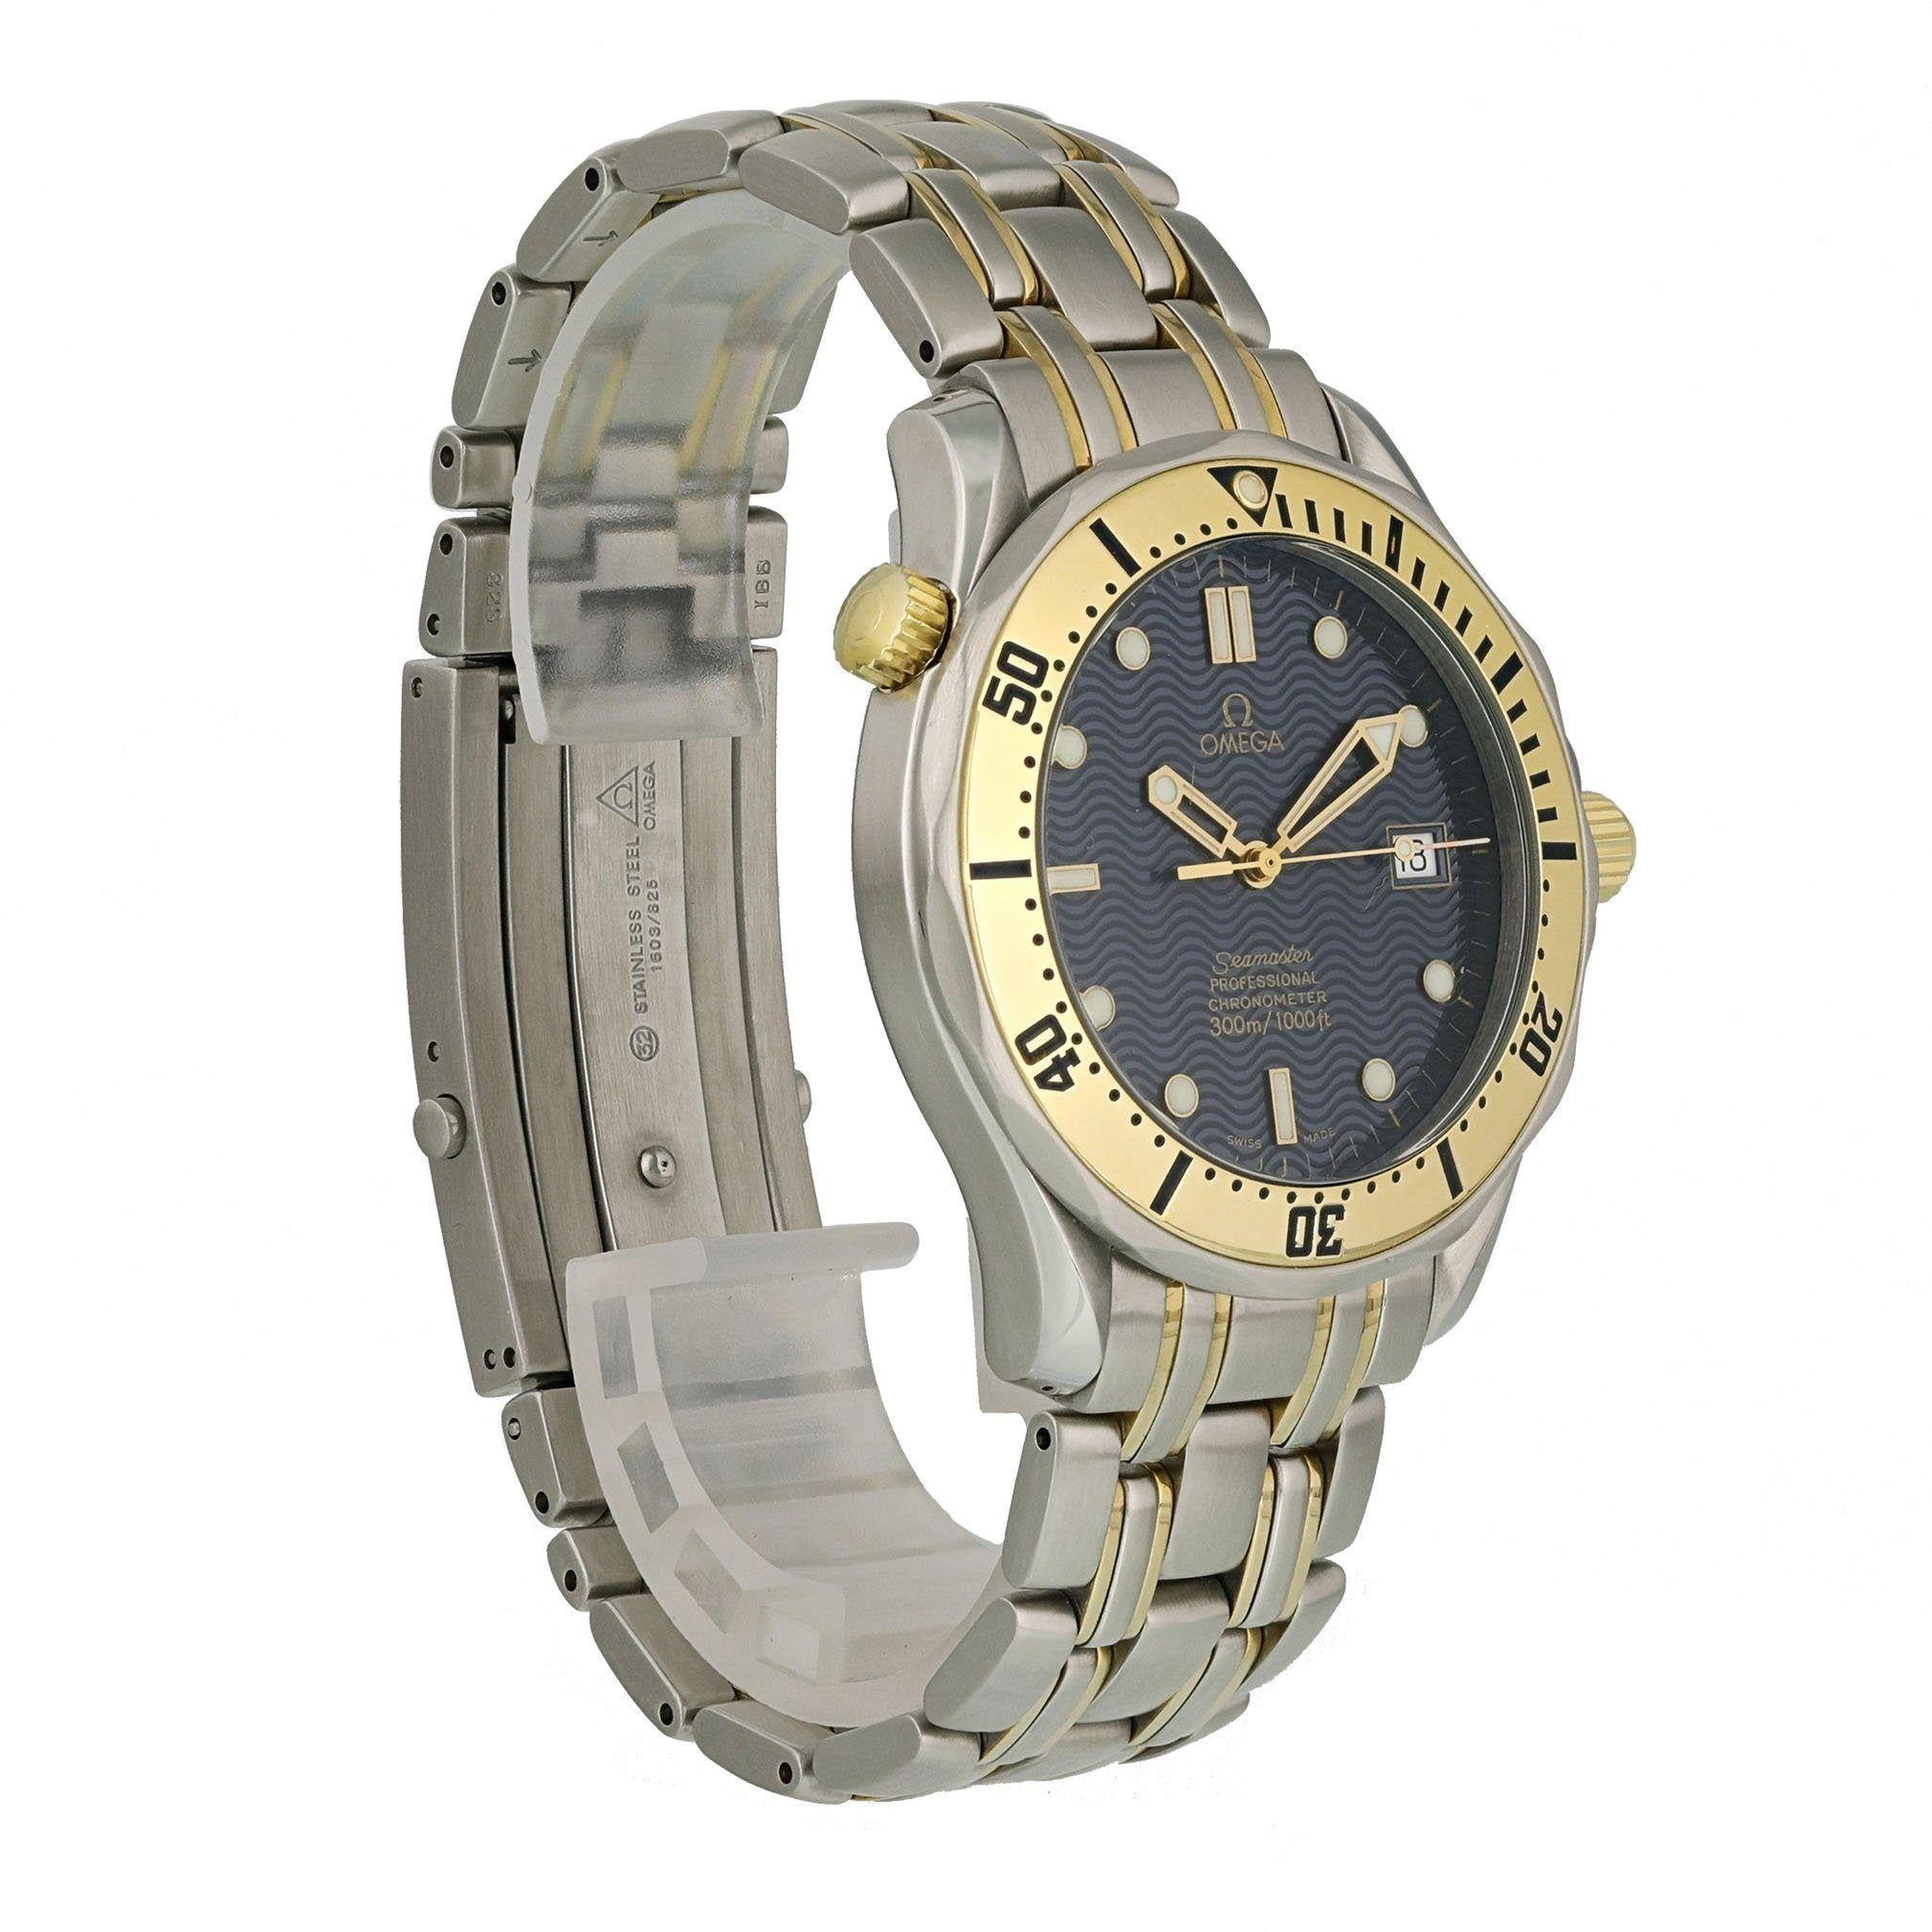 Omega Seamaster Professional 2332.80.00 Men's Watch In Excellent Condition For Sale In New York, NY